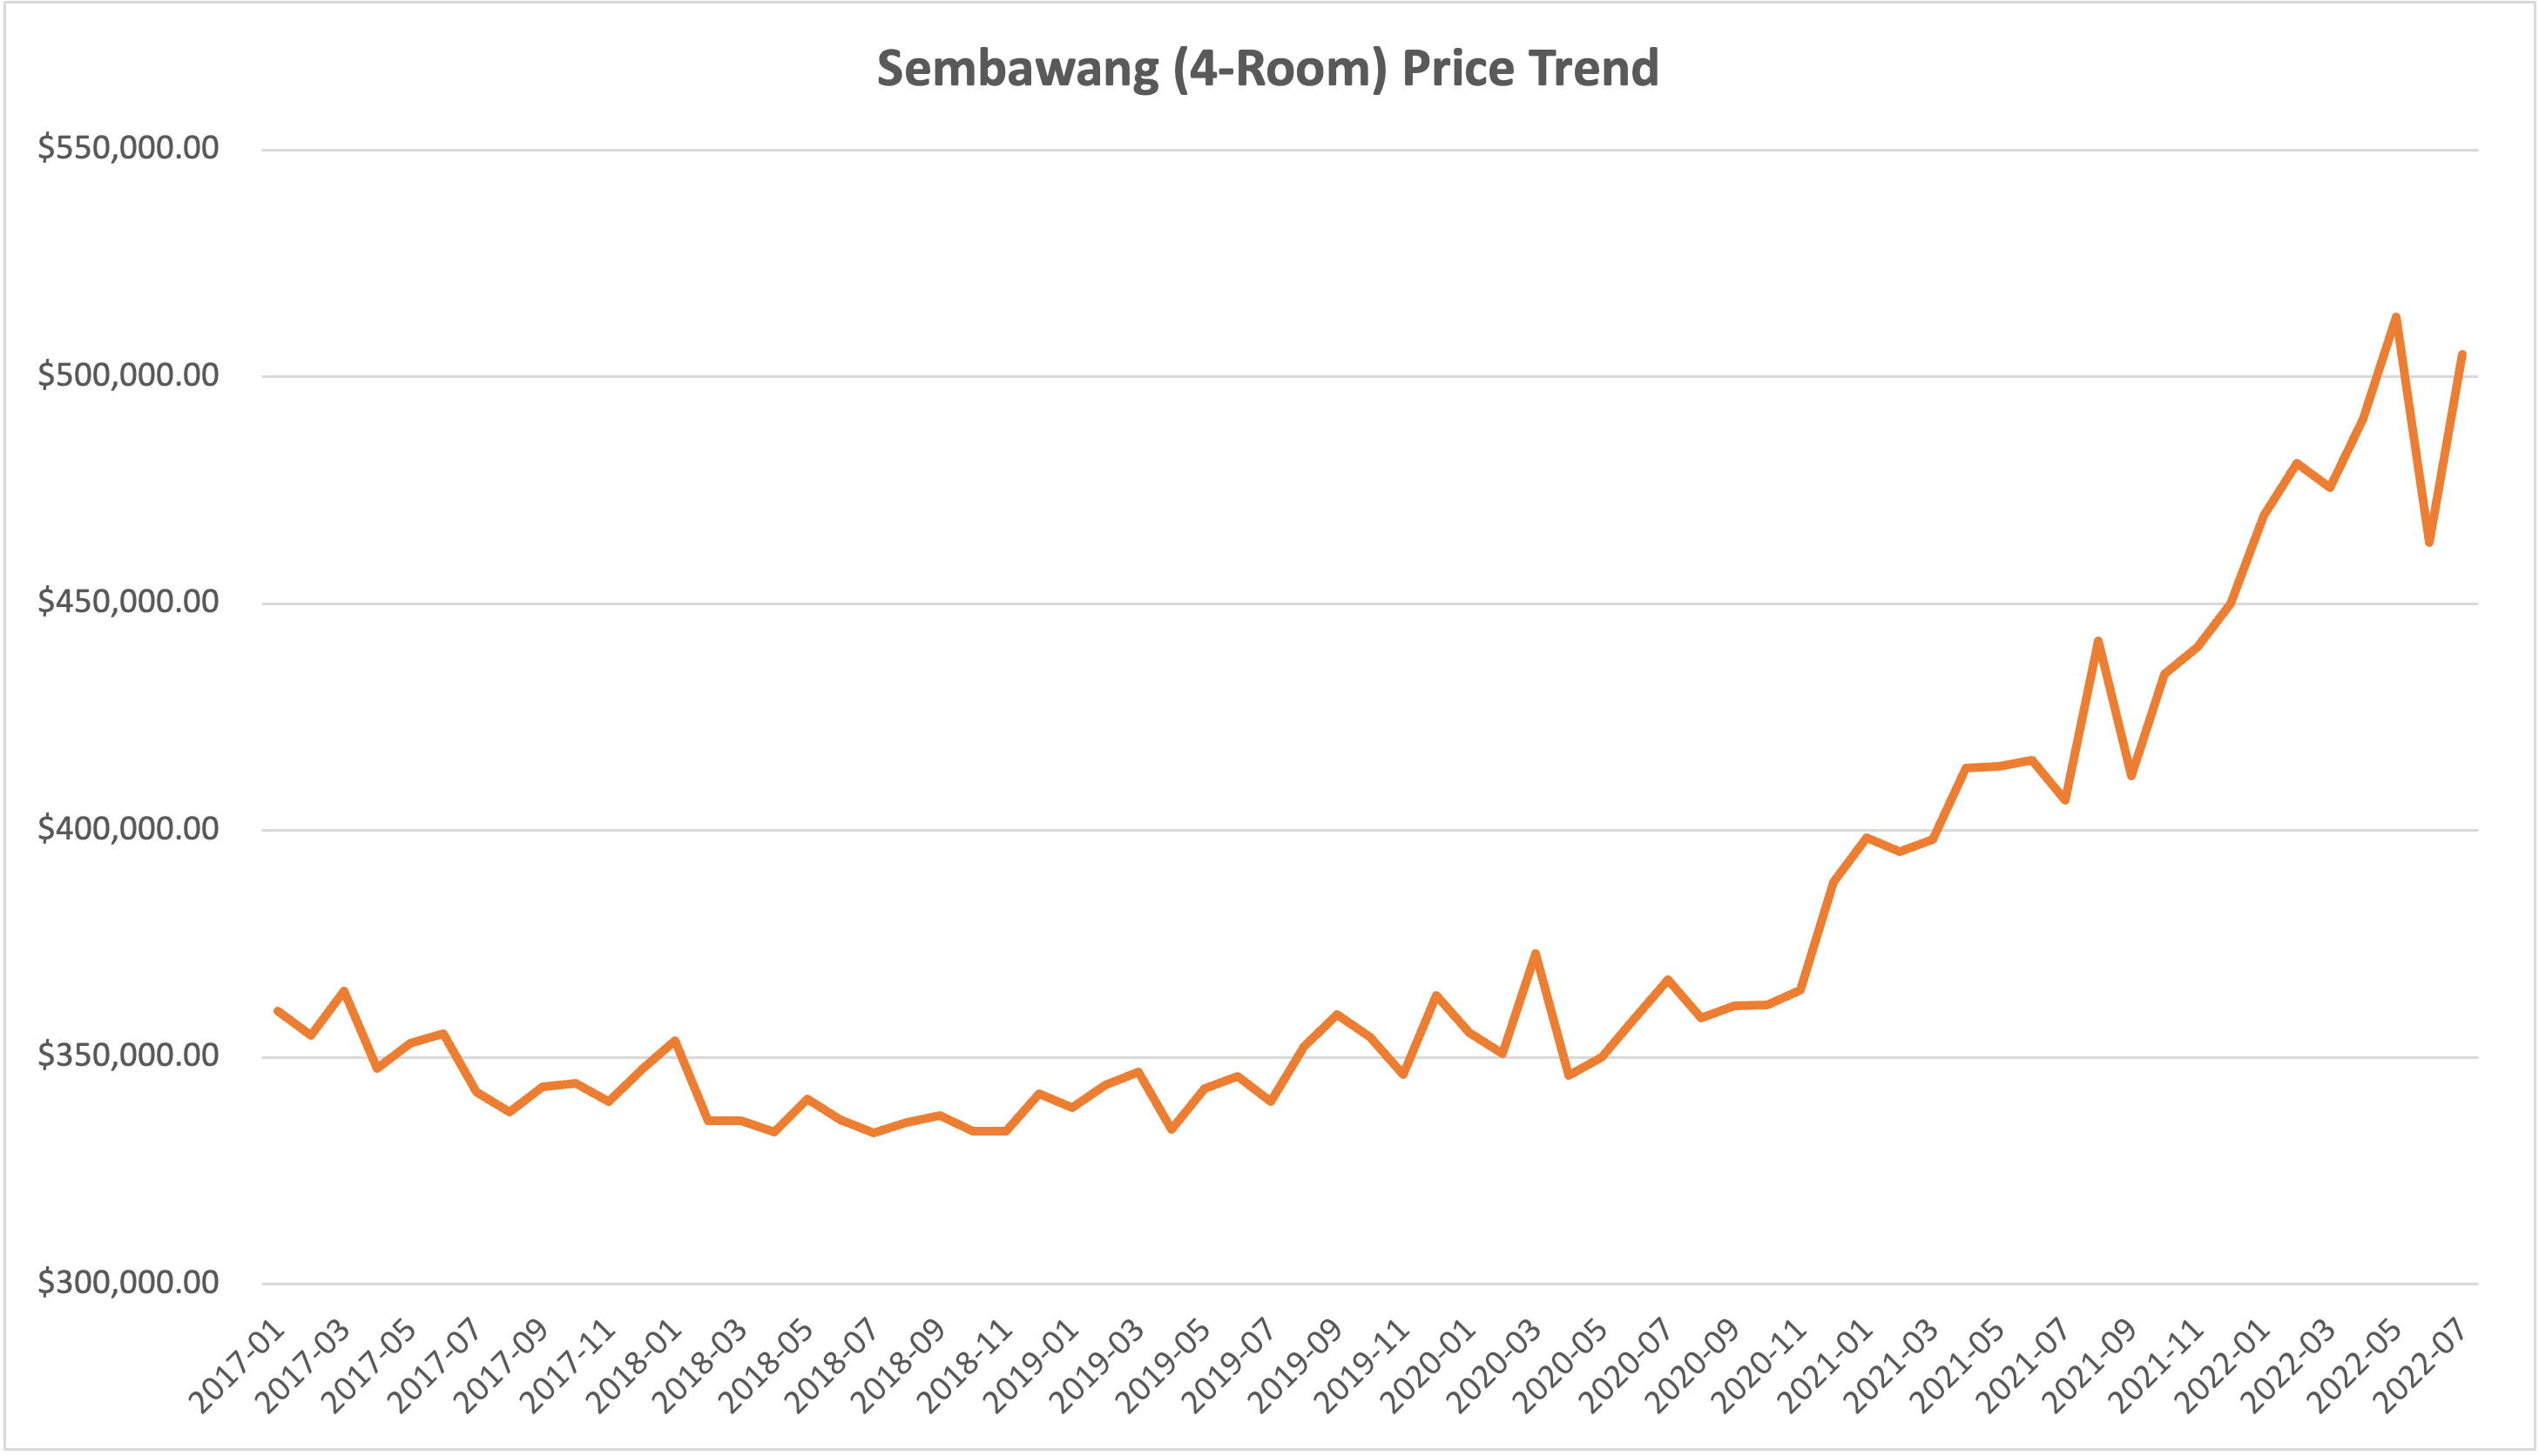 Sembawang 4-room price trend from 2018 to 2022